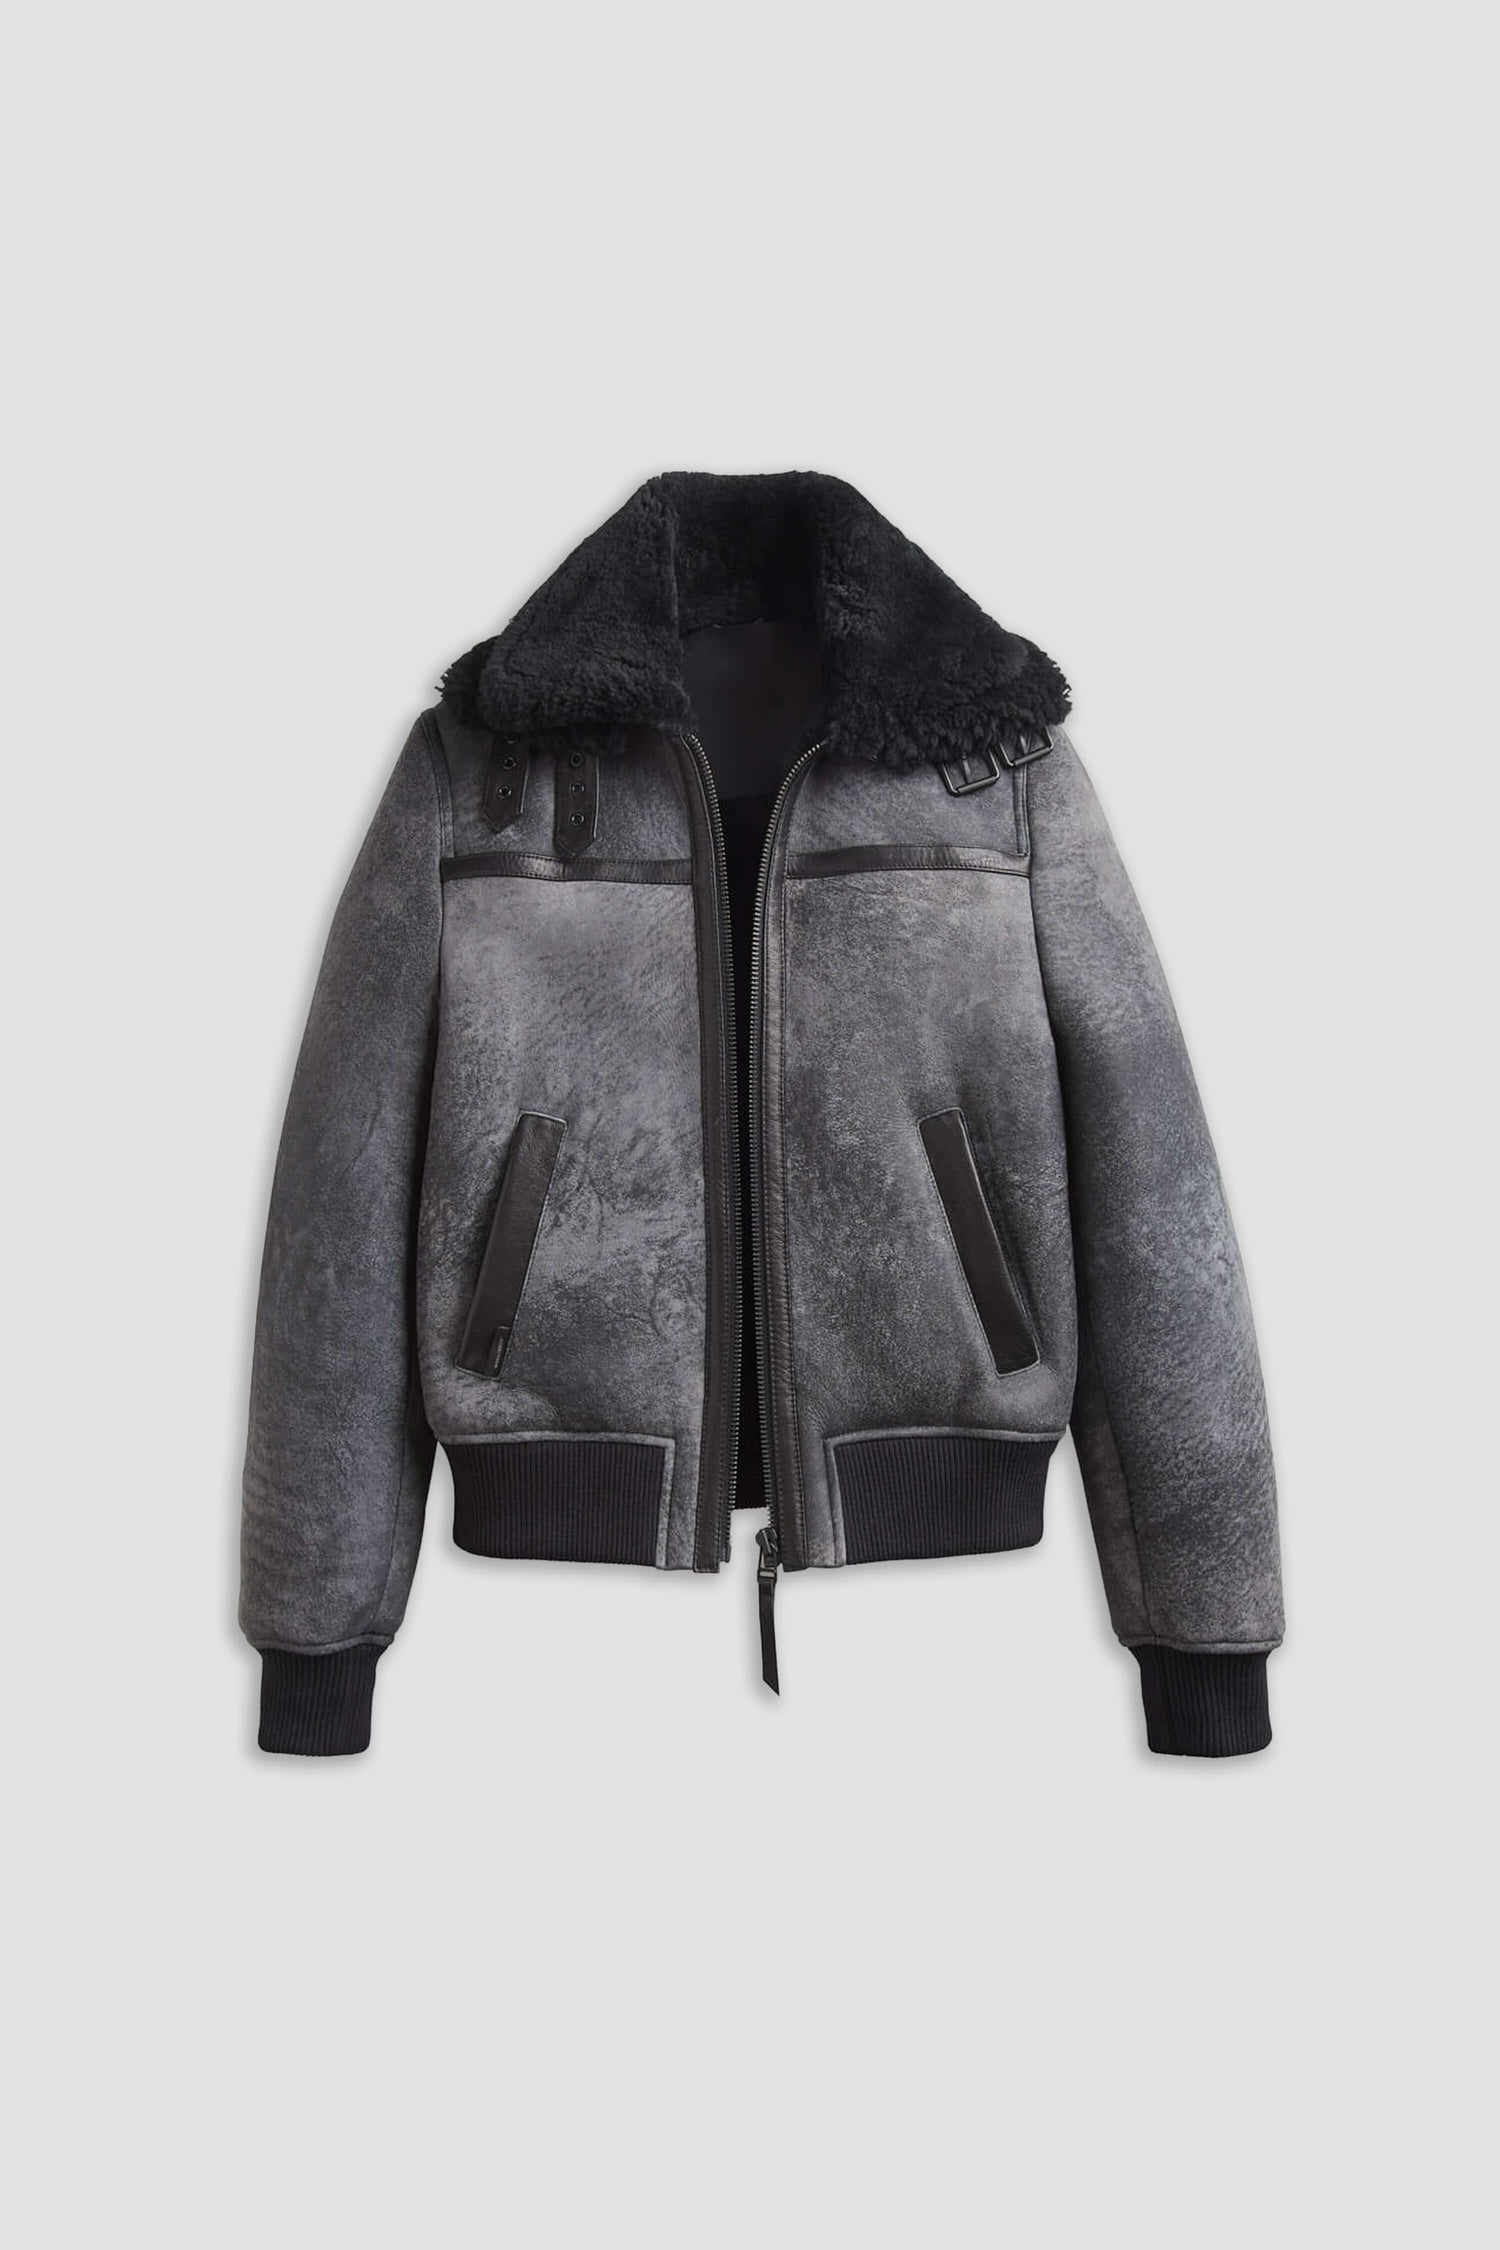 Mens Luxury Shearling Collection